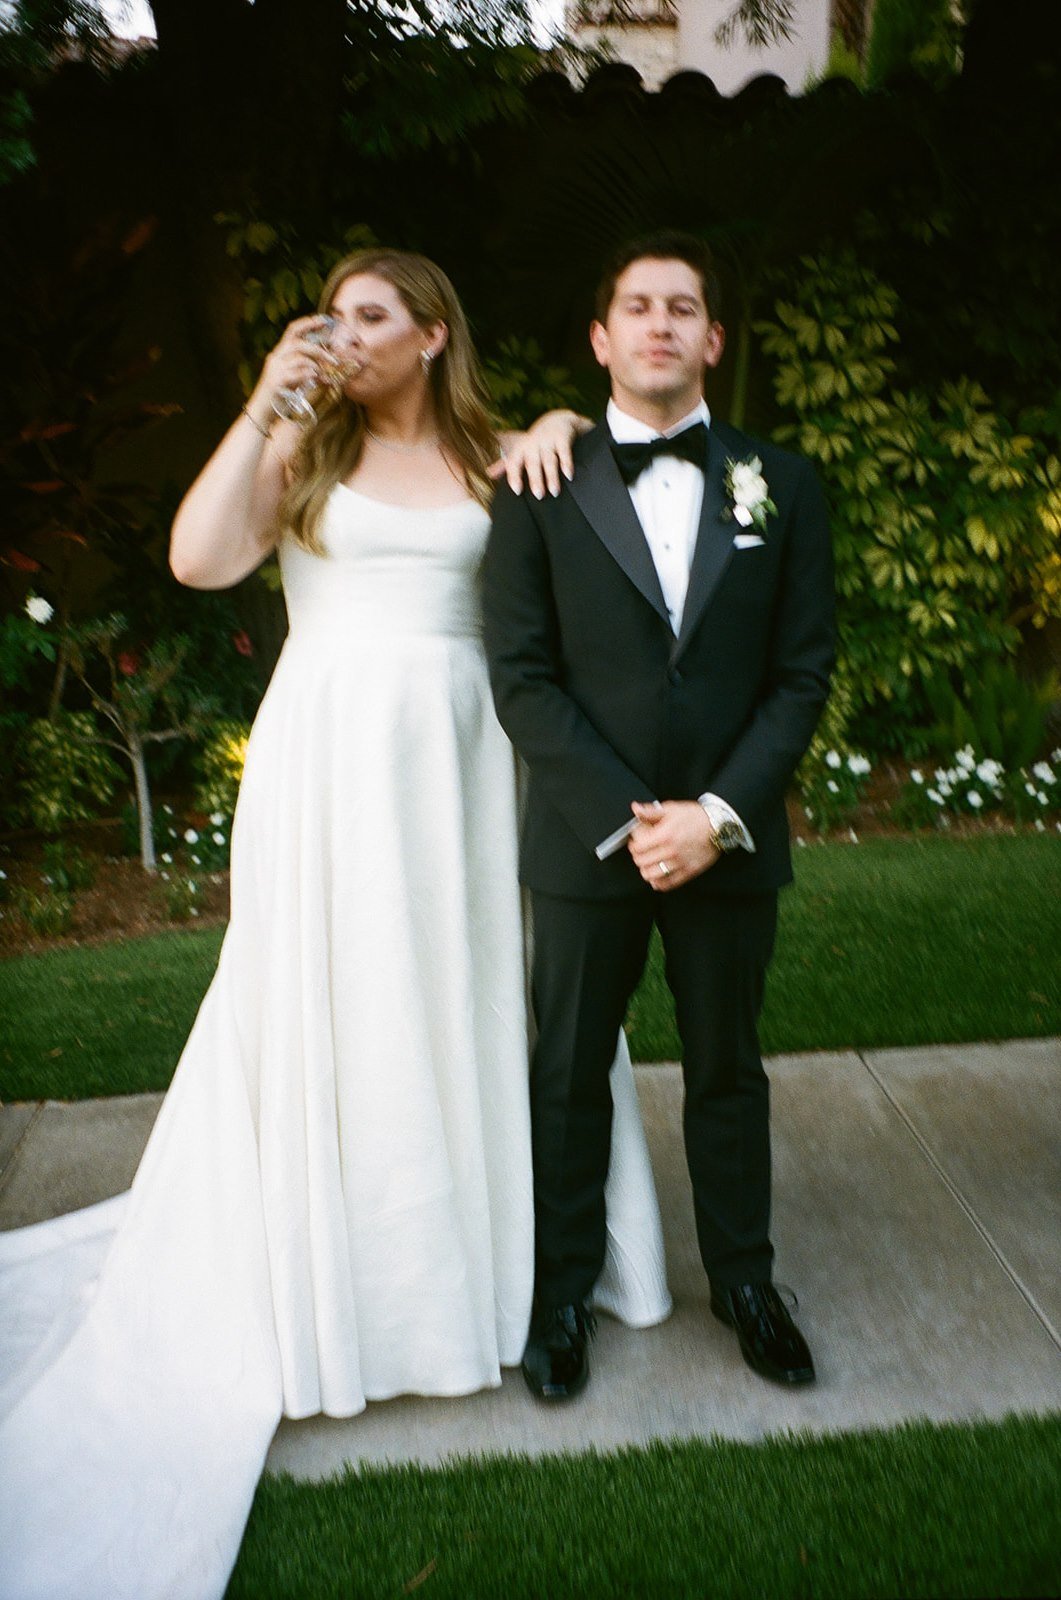 Film photos of Luxury bride and groom portraits for an outdoor wedding